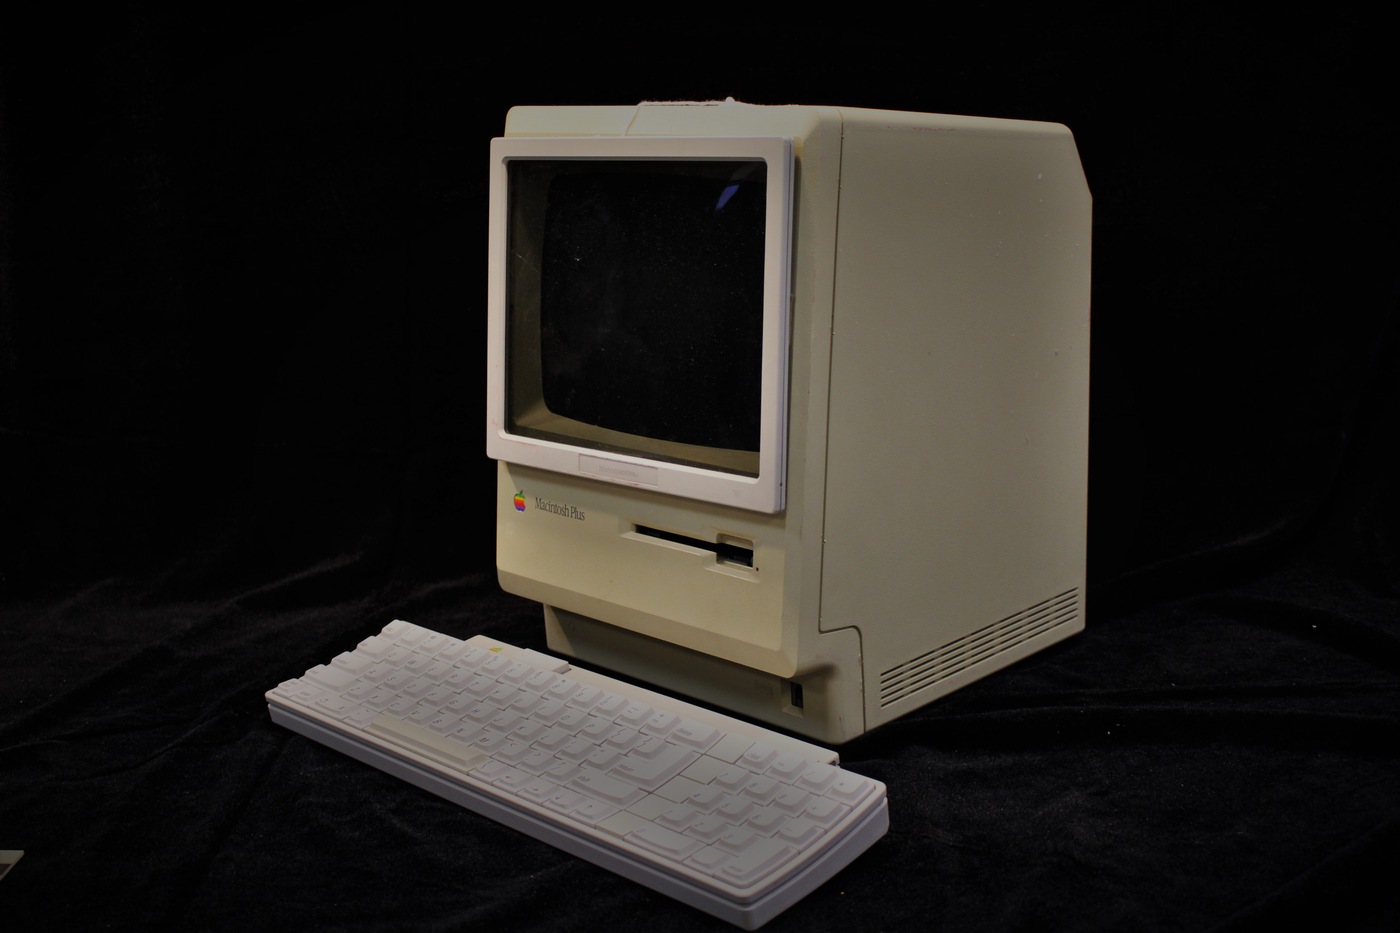 The FBI’s November Artifact of the Month is a Macintosh Plus that FBI Laboratory professionals used to create crime scene drawings.